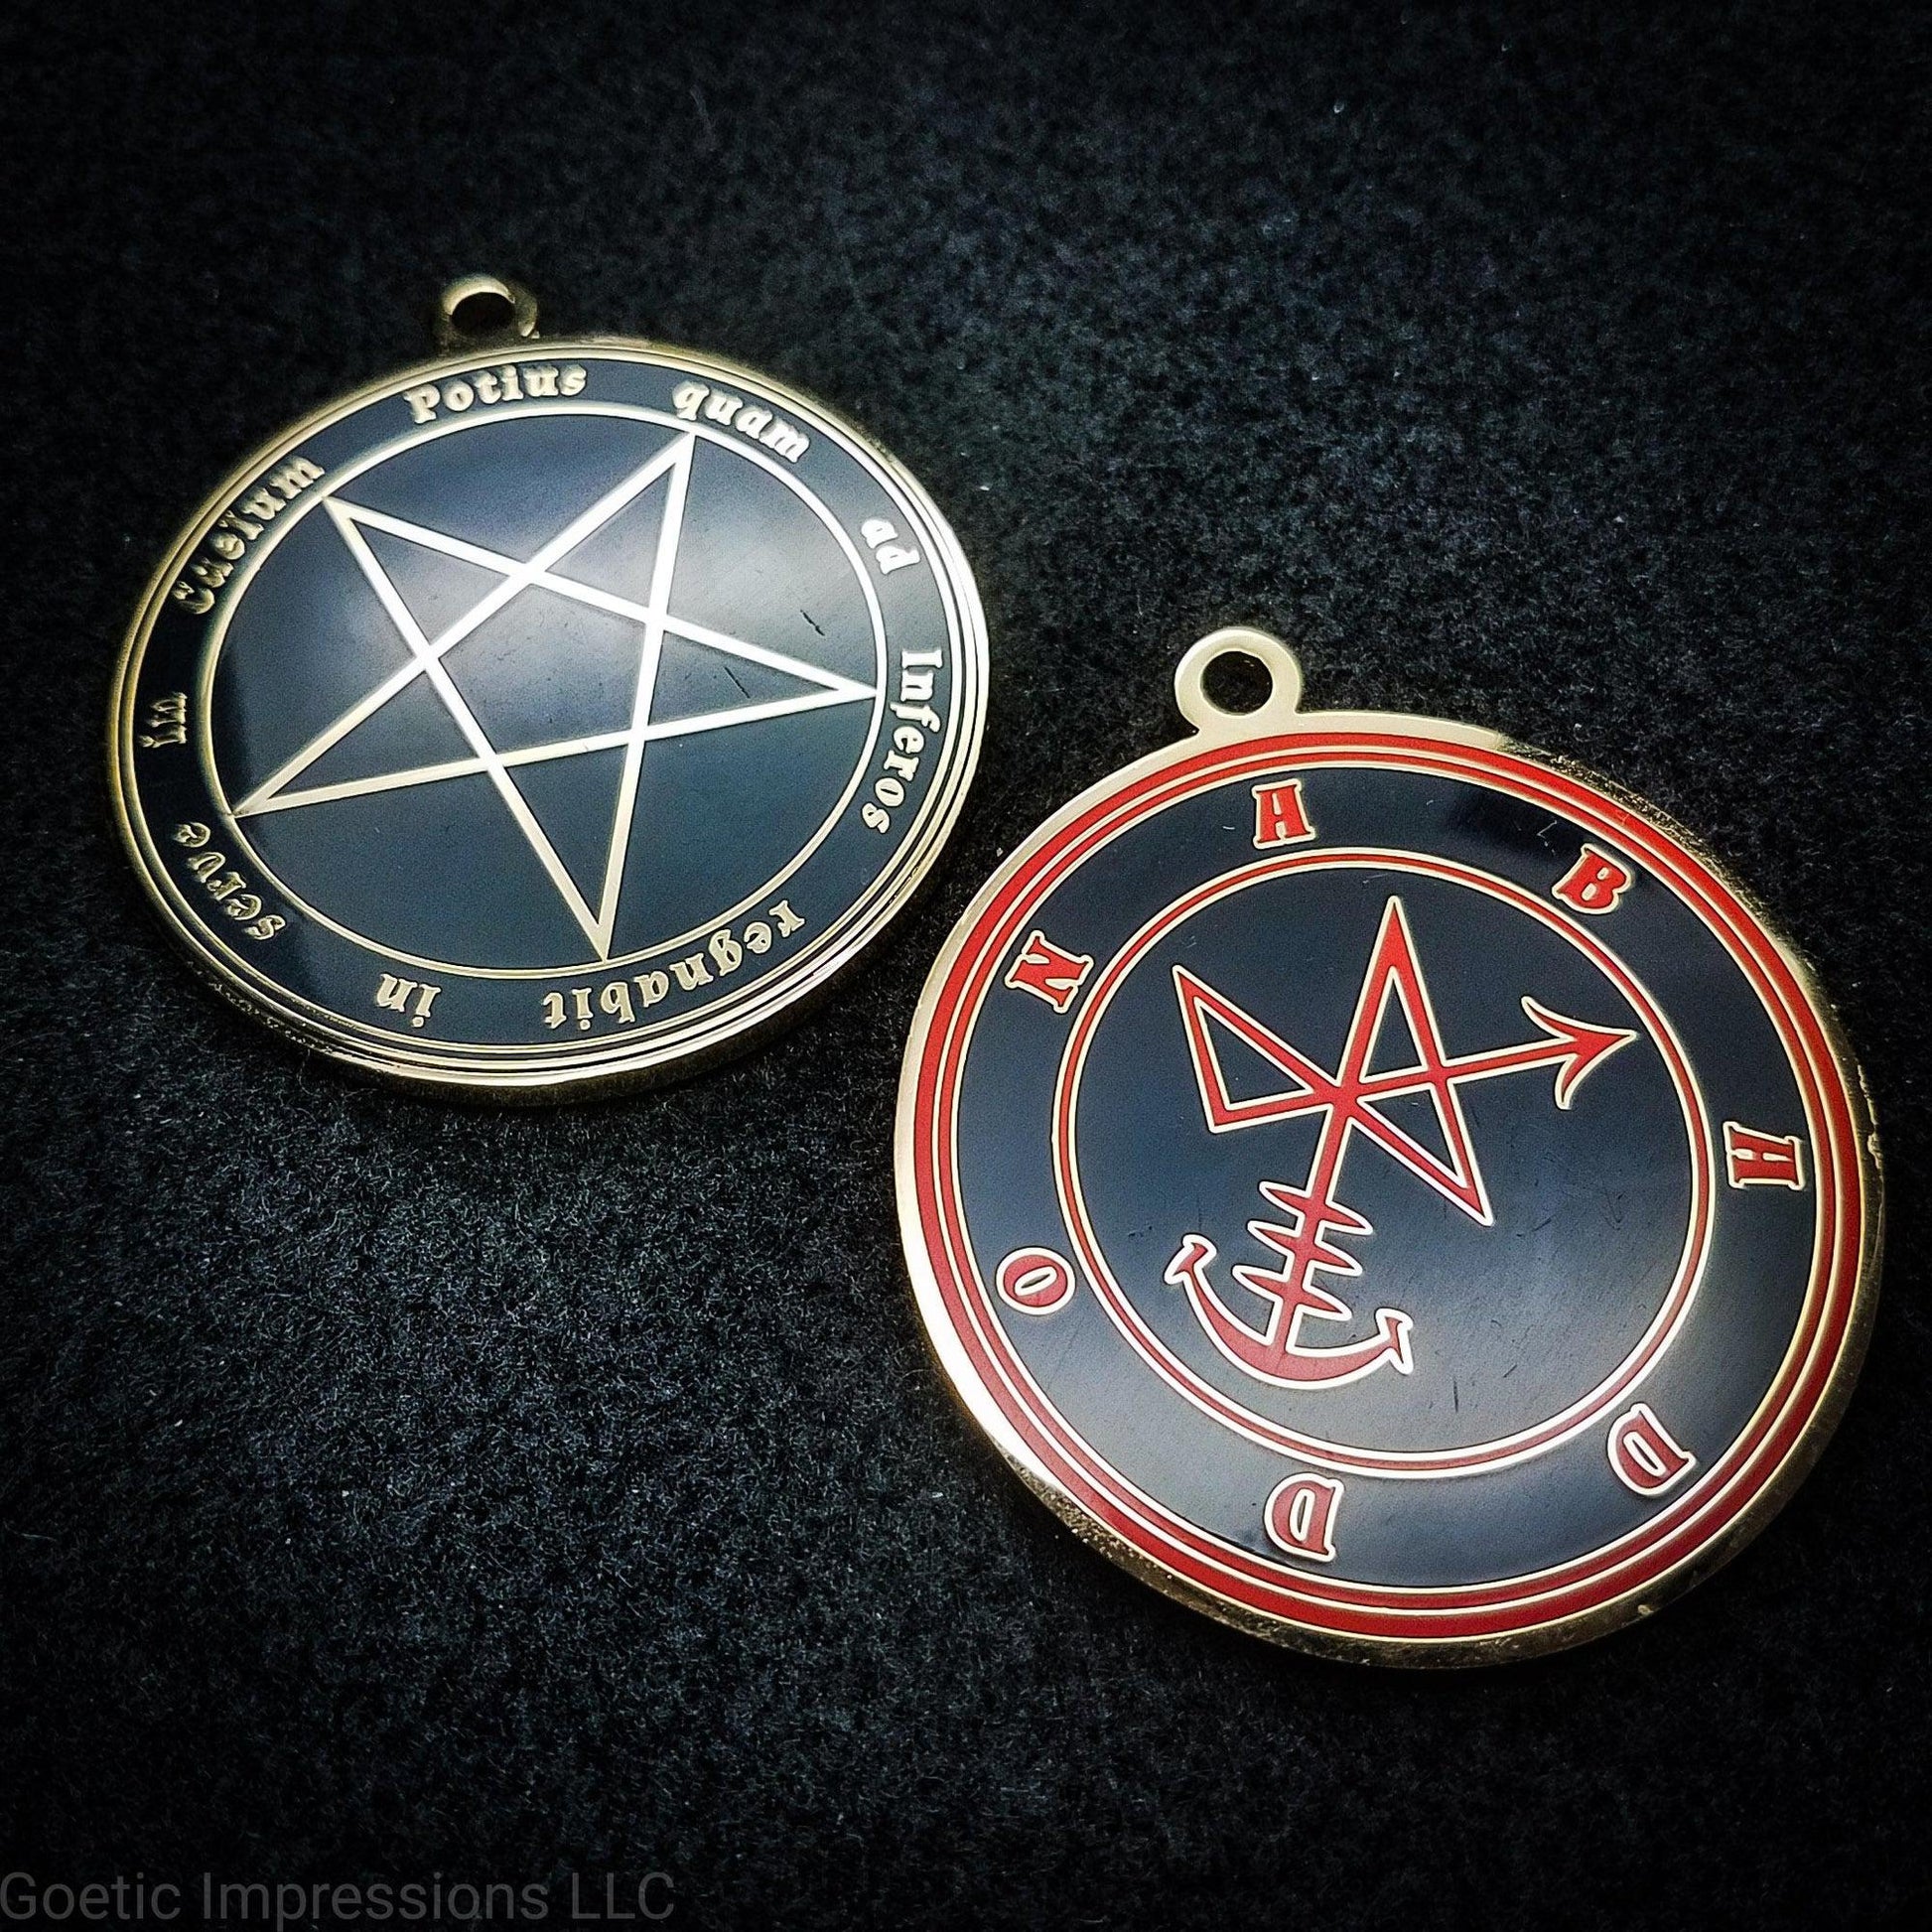 Abaddon sigil ritual pendant with pentagram on reverse side. The reverse side of each Sigil medallion features the Latin phrase 'Potius quam ad Inferos regnabit in serve in Caelum' meaning, 'Better to rule in Hell than to serve in Heaven'.